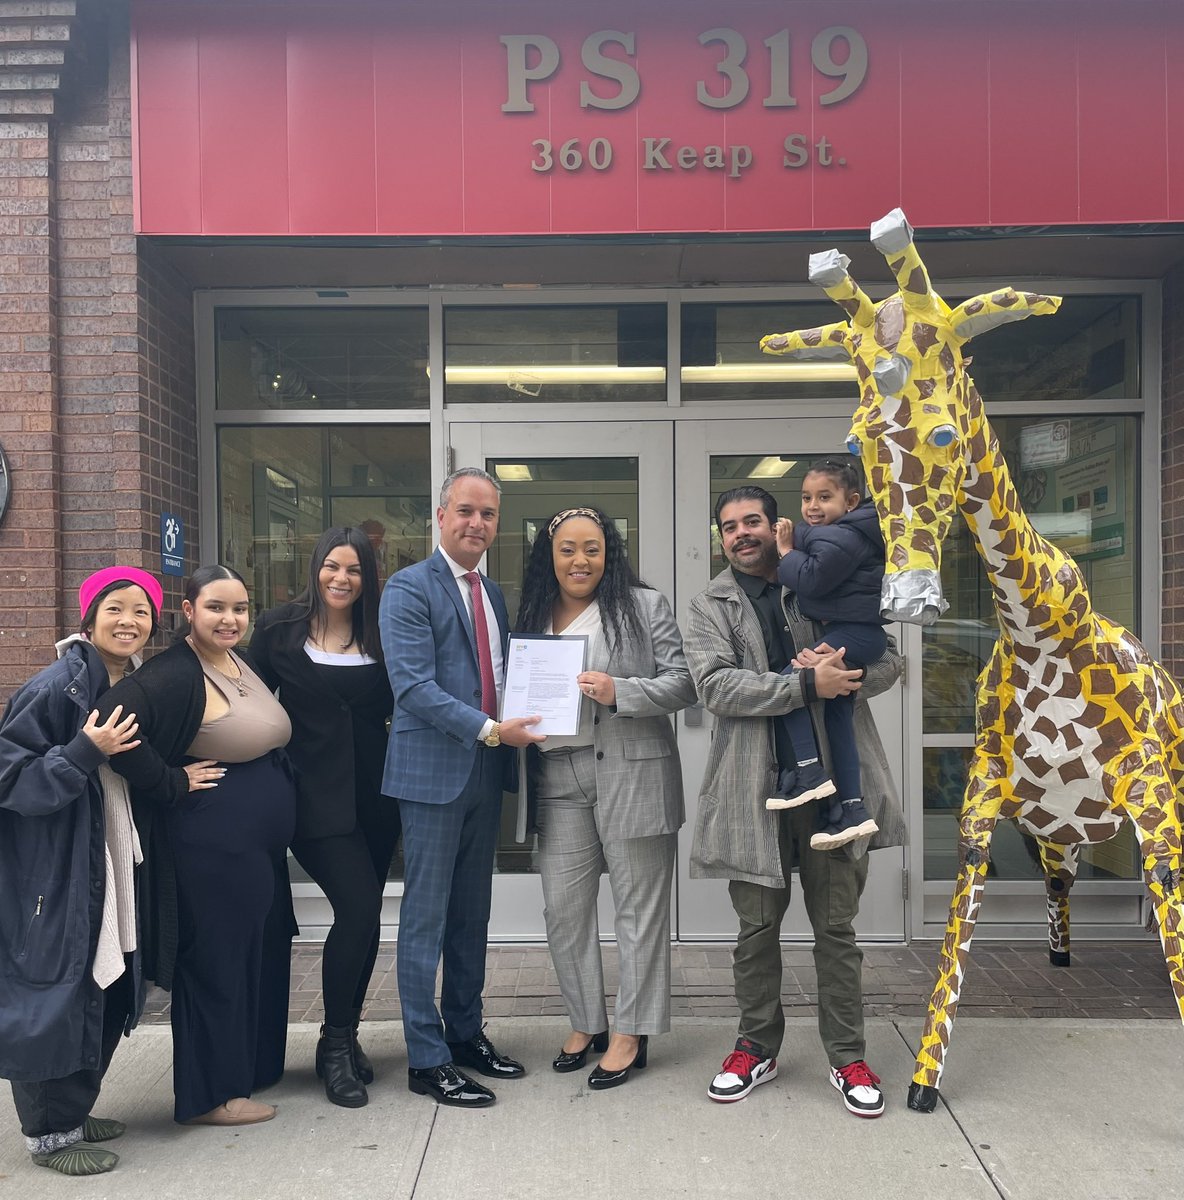 Please join me in congratulating the newly appointed and very well deserved principal of PS 319 in District 14, Zenzile Dabreo-St.Hilaire! Congratulations and much success! @NYCPSD14 #One4All